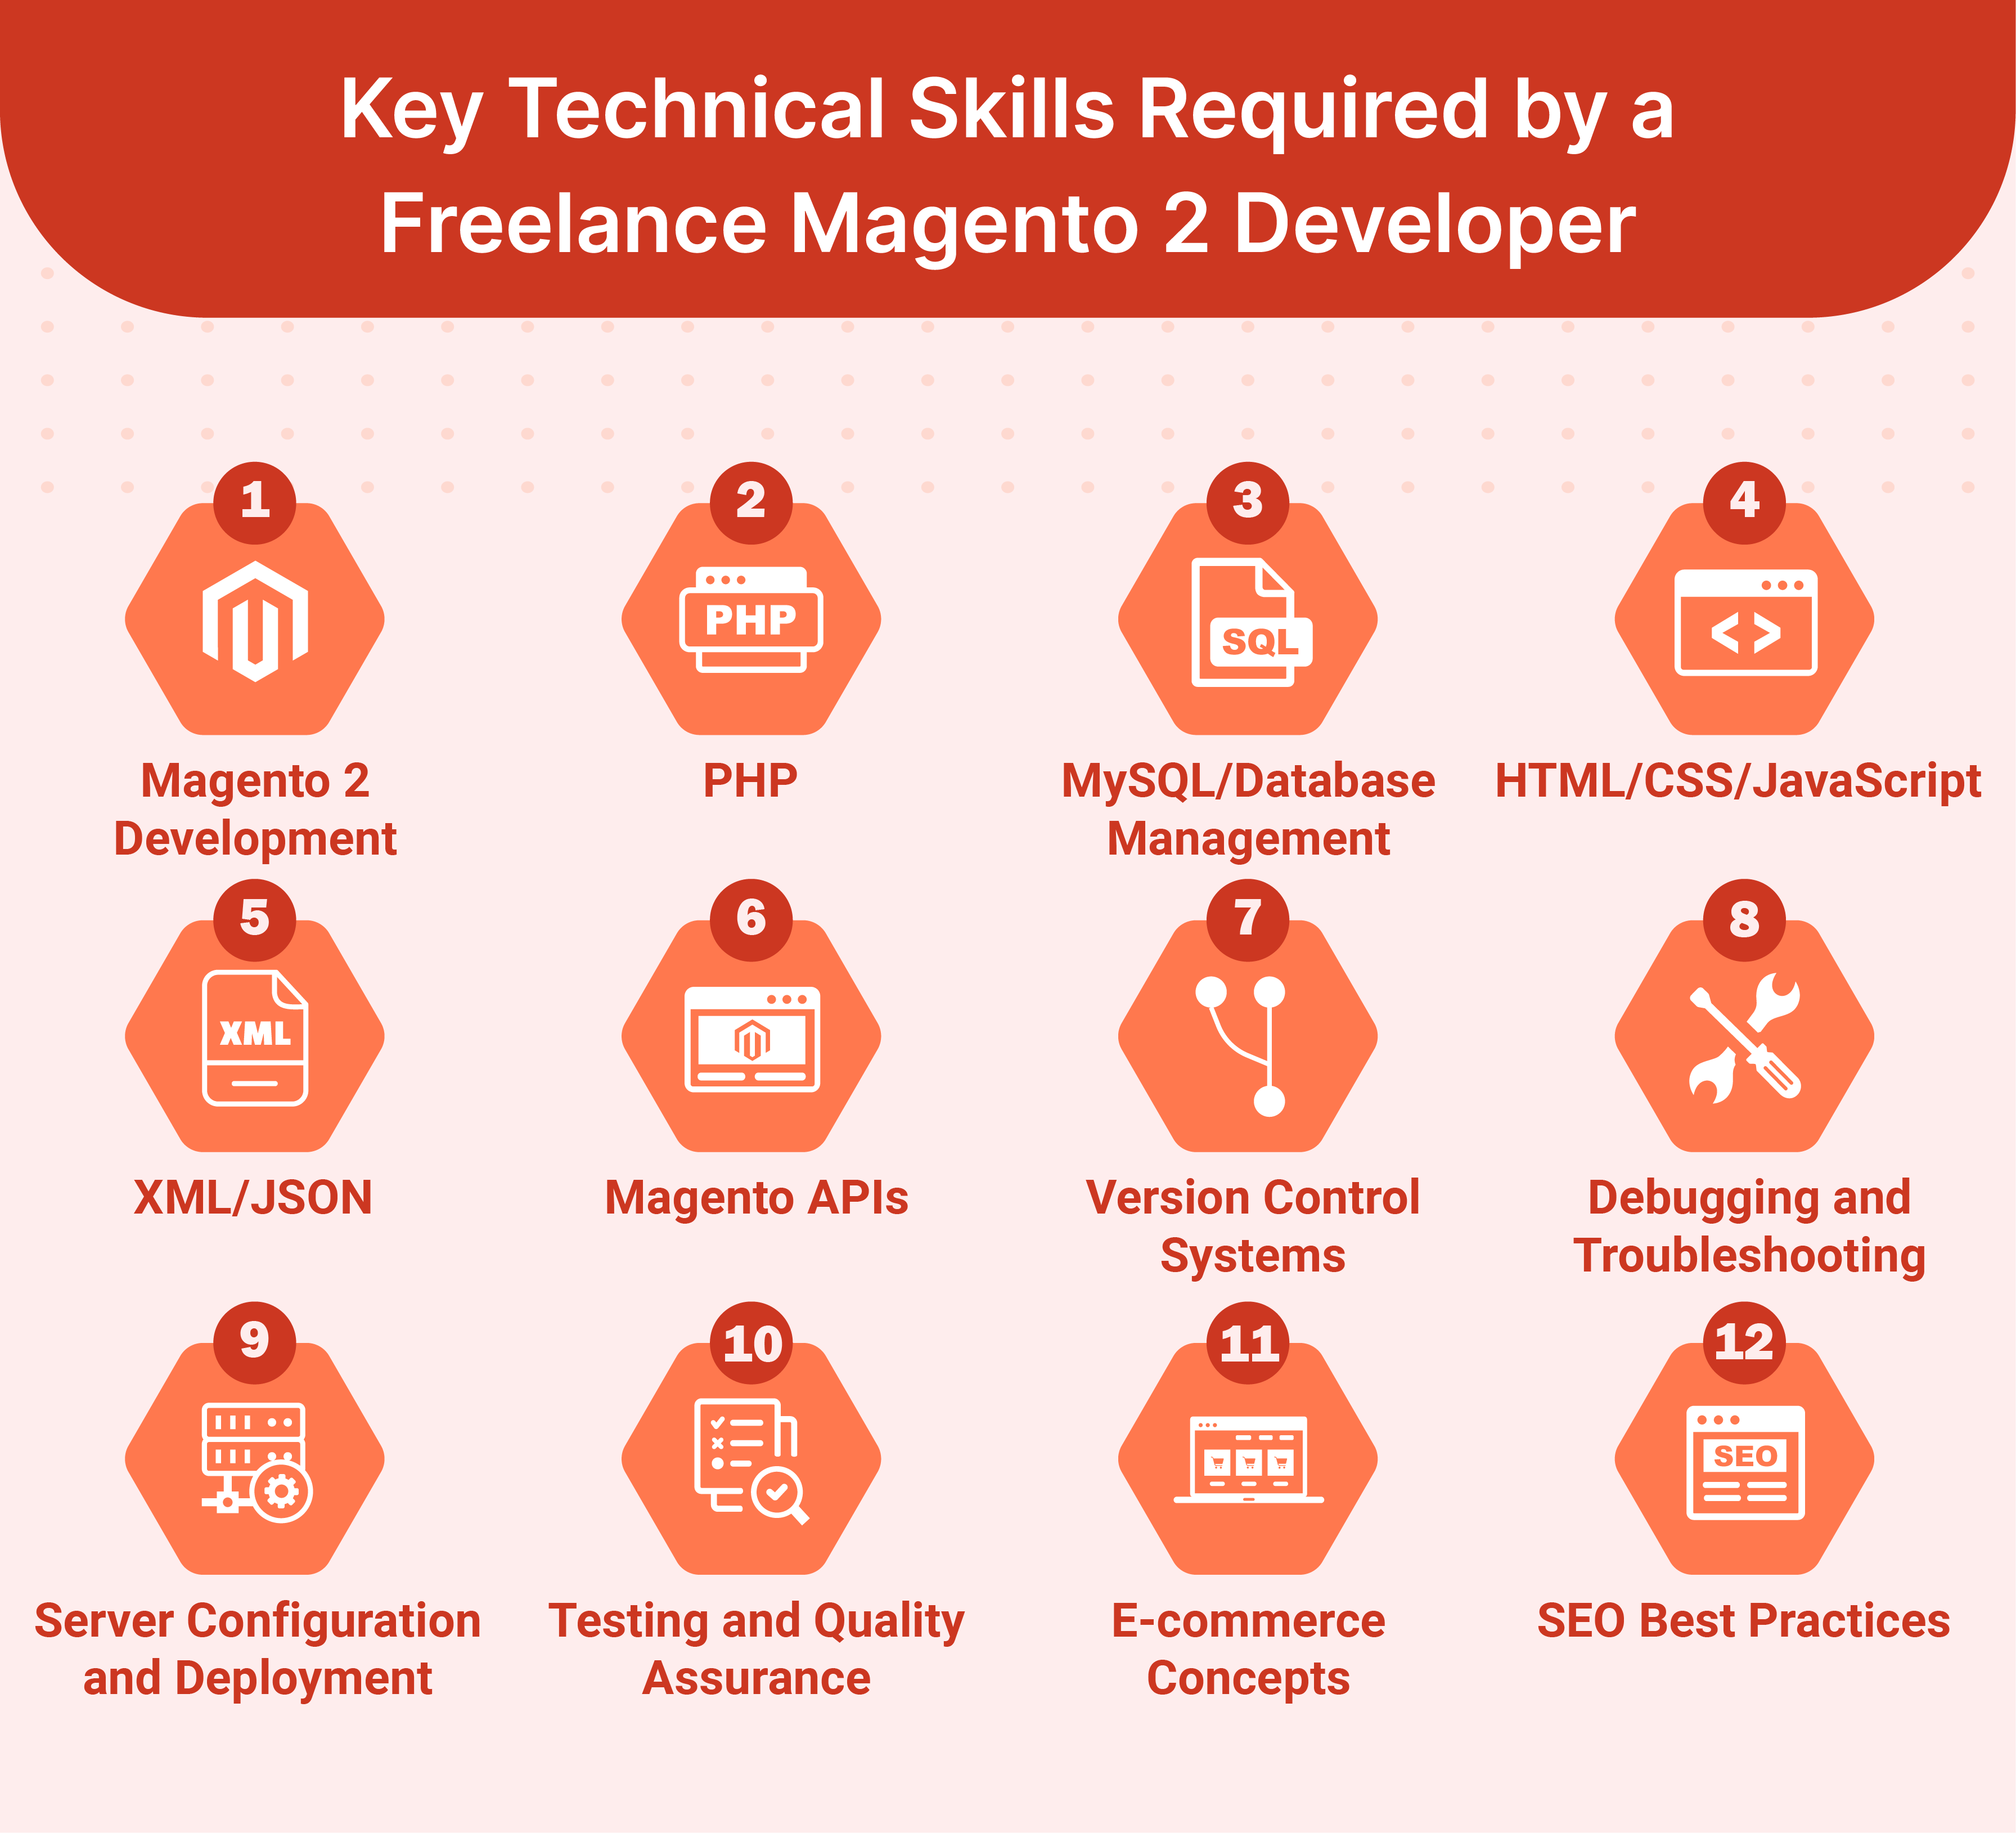 Key Technical Skills Required by a Freelance Magento 2 Developer